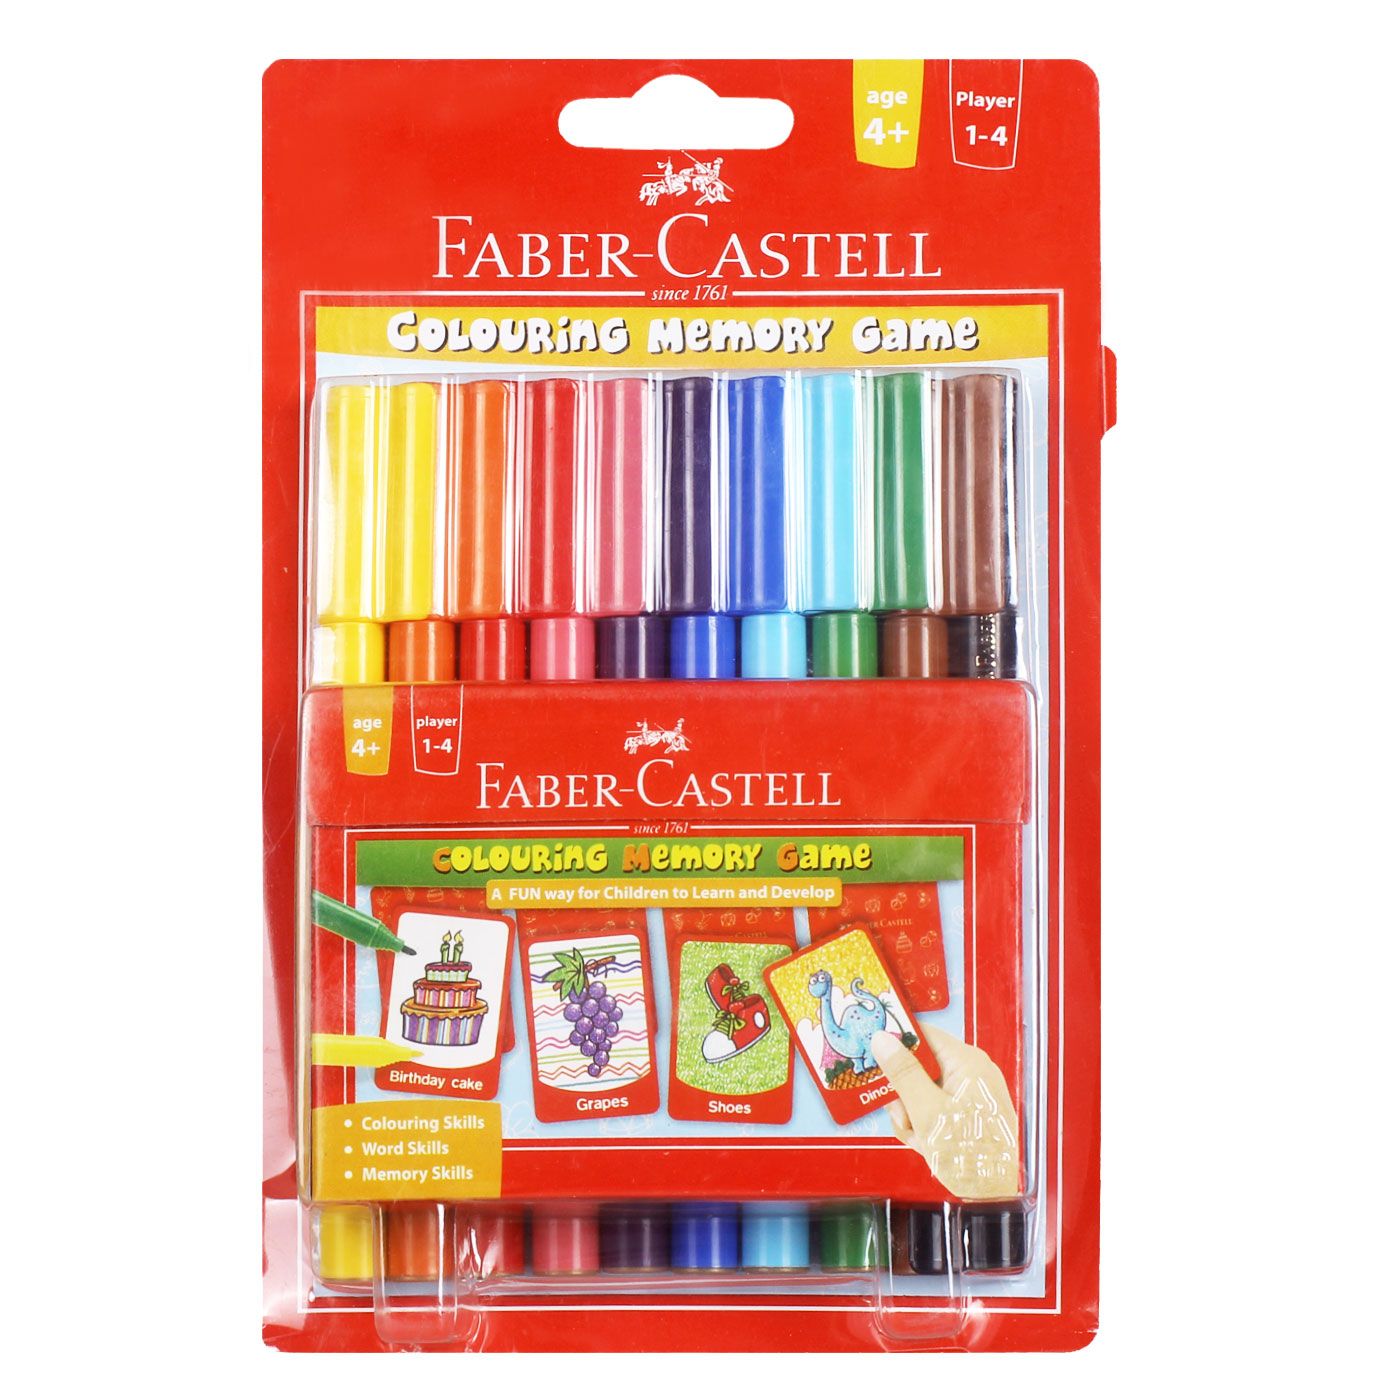 Faber Castell Connector Pen Memory Card - 1